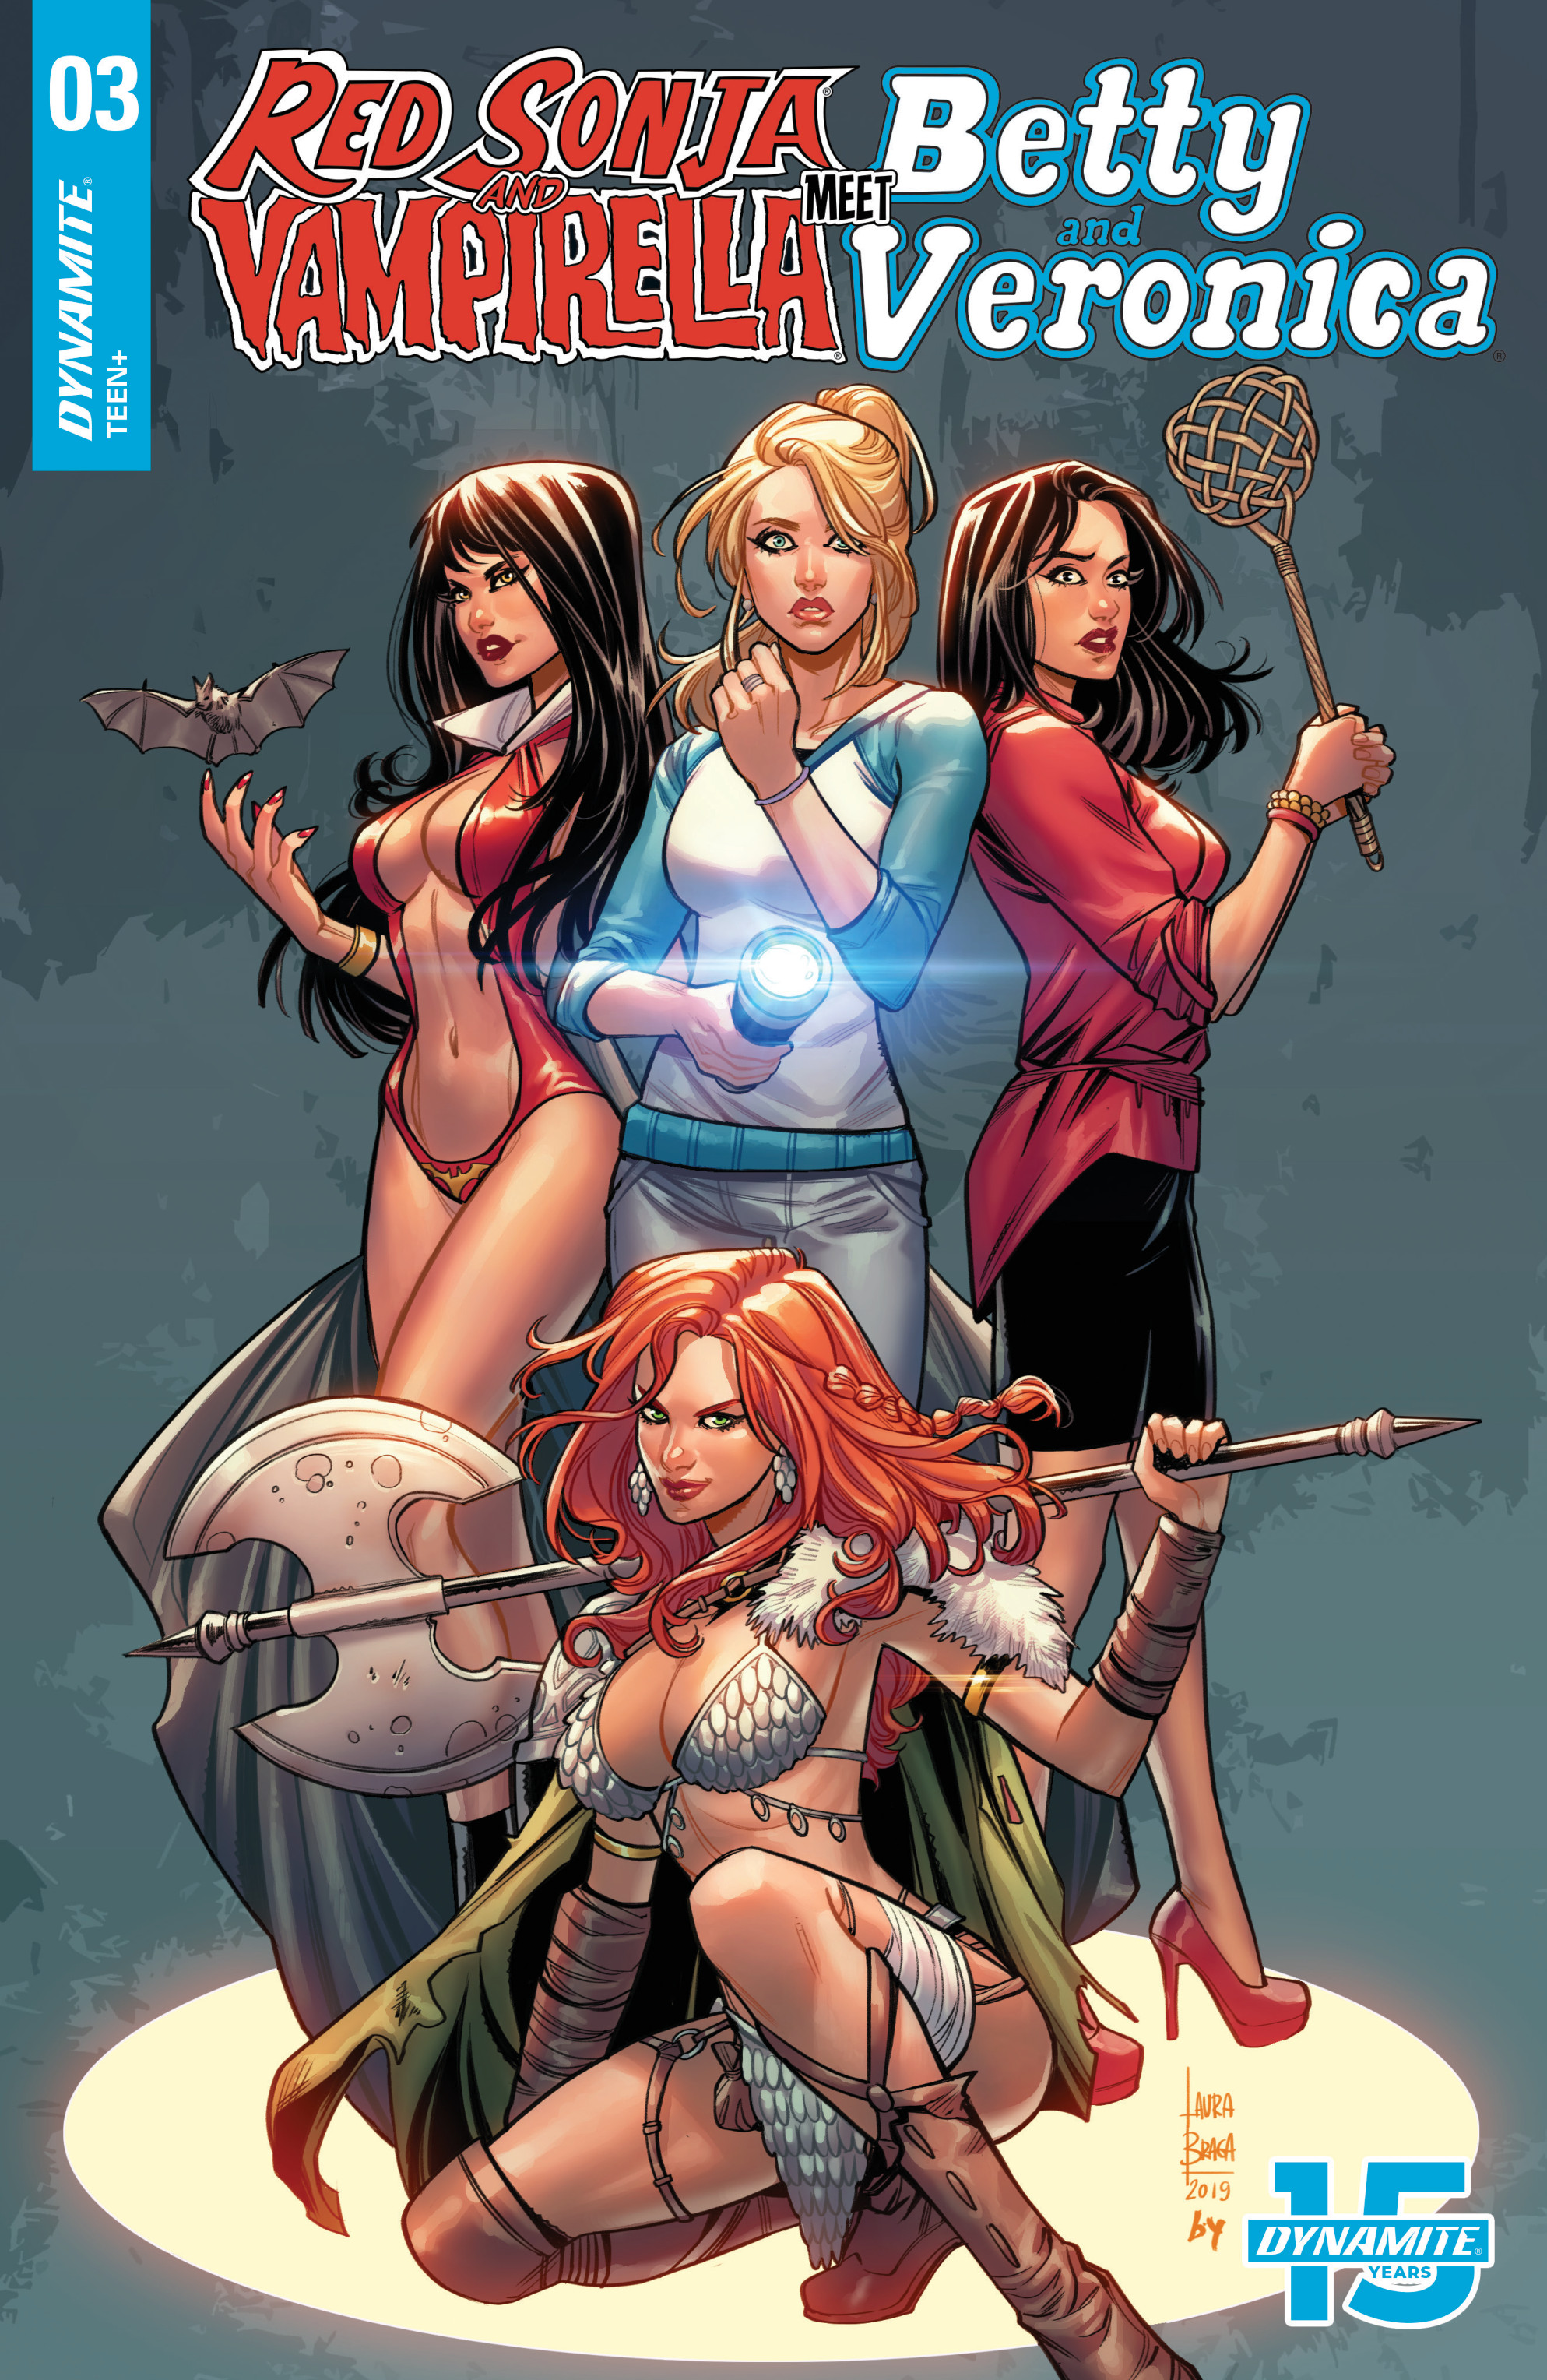 Read online Red Sonja and Vampirella Meet Betty and Veronica comic -  Issue #3 - 3